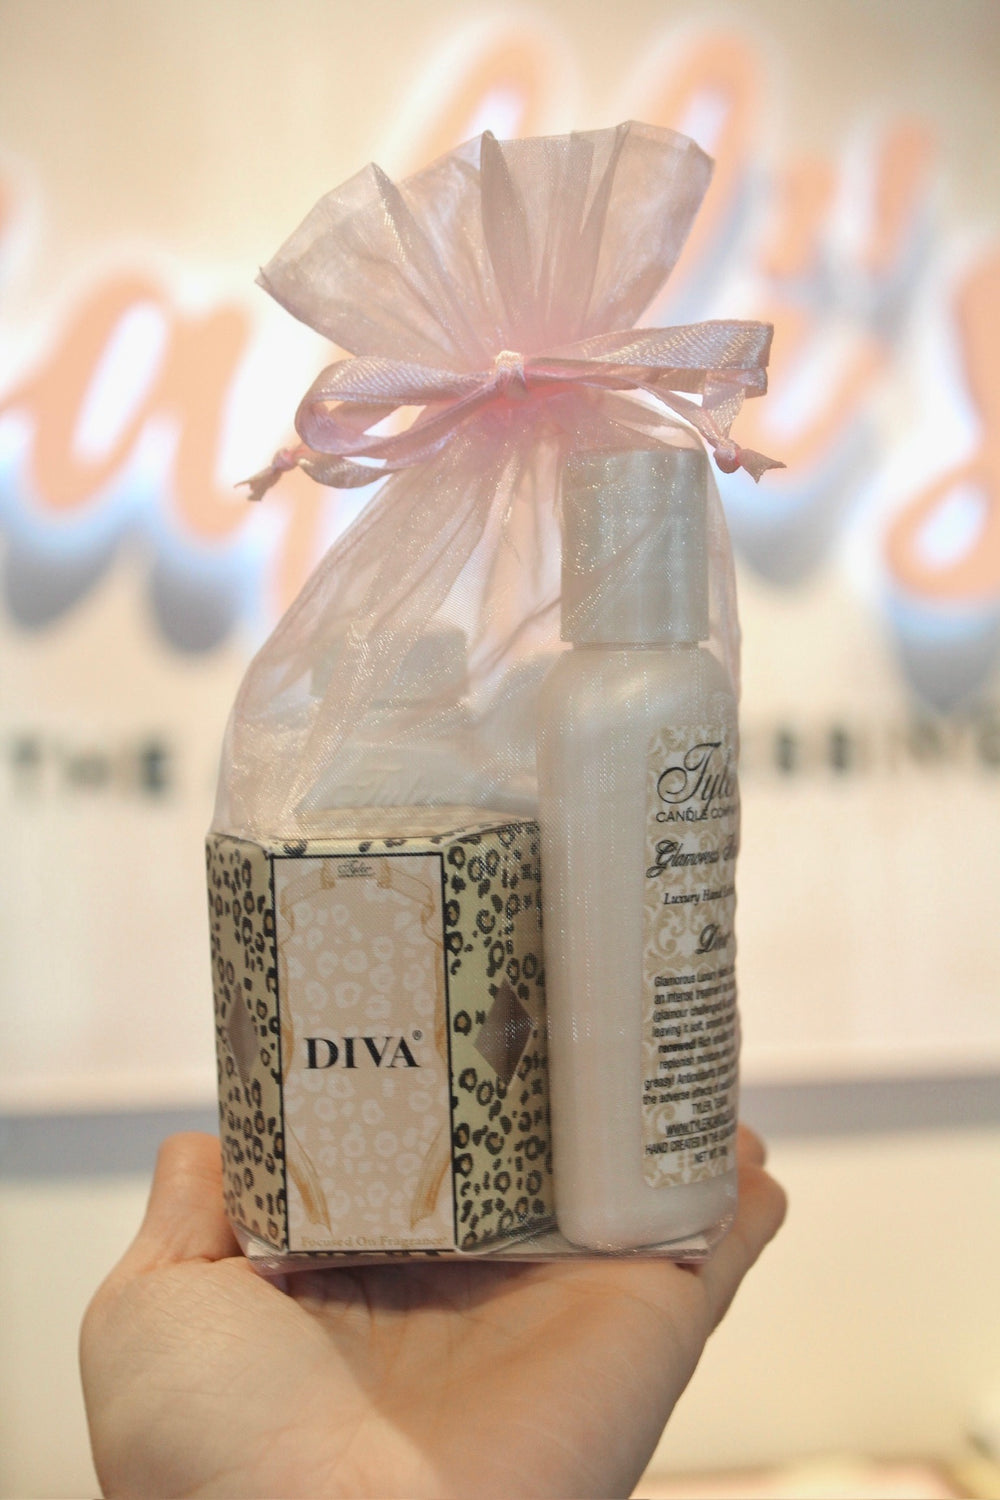 Tyler Candle Gift Set in Diva scent